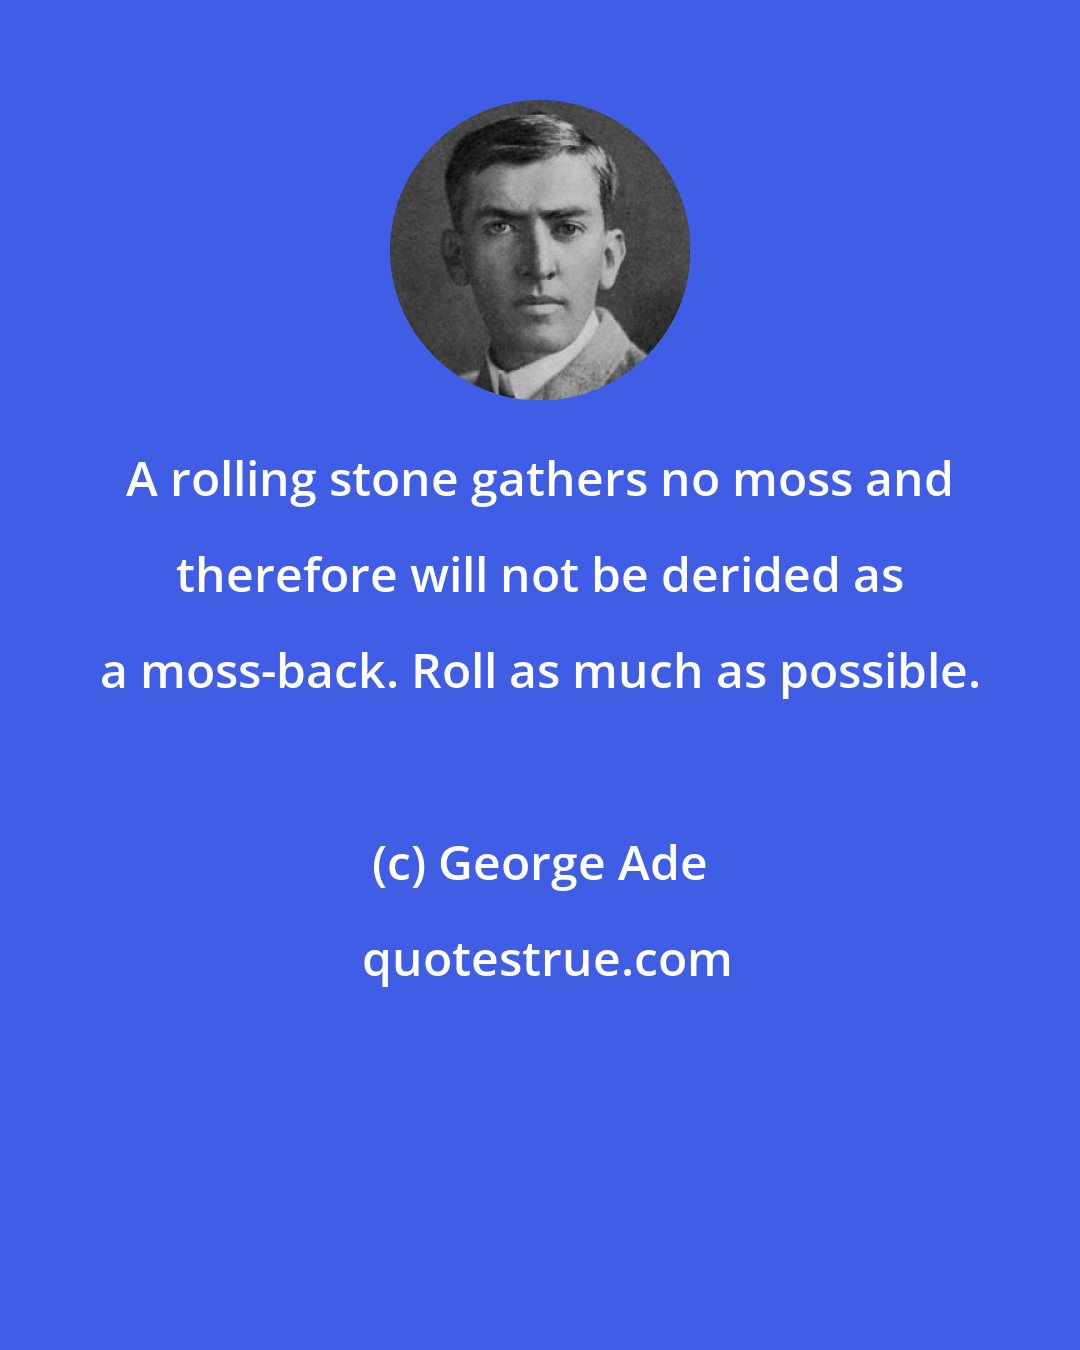 George Ade: A rolling stone gathers no moss and therefore will not be derided as a moss-back. Roll as much as possible.